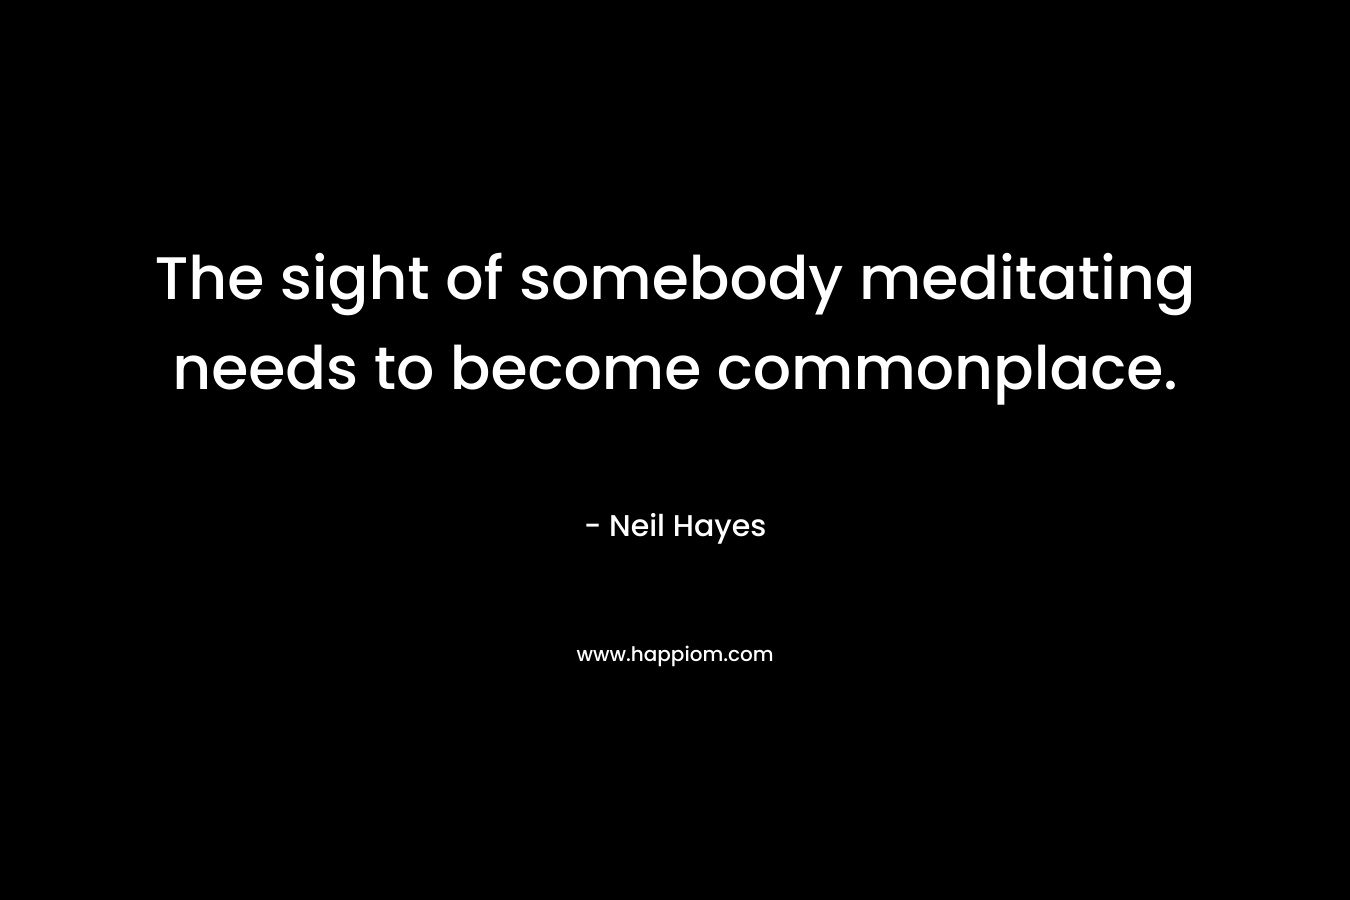 The sight of somebody meditating needs to become commonplace. – Neil Hayes